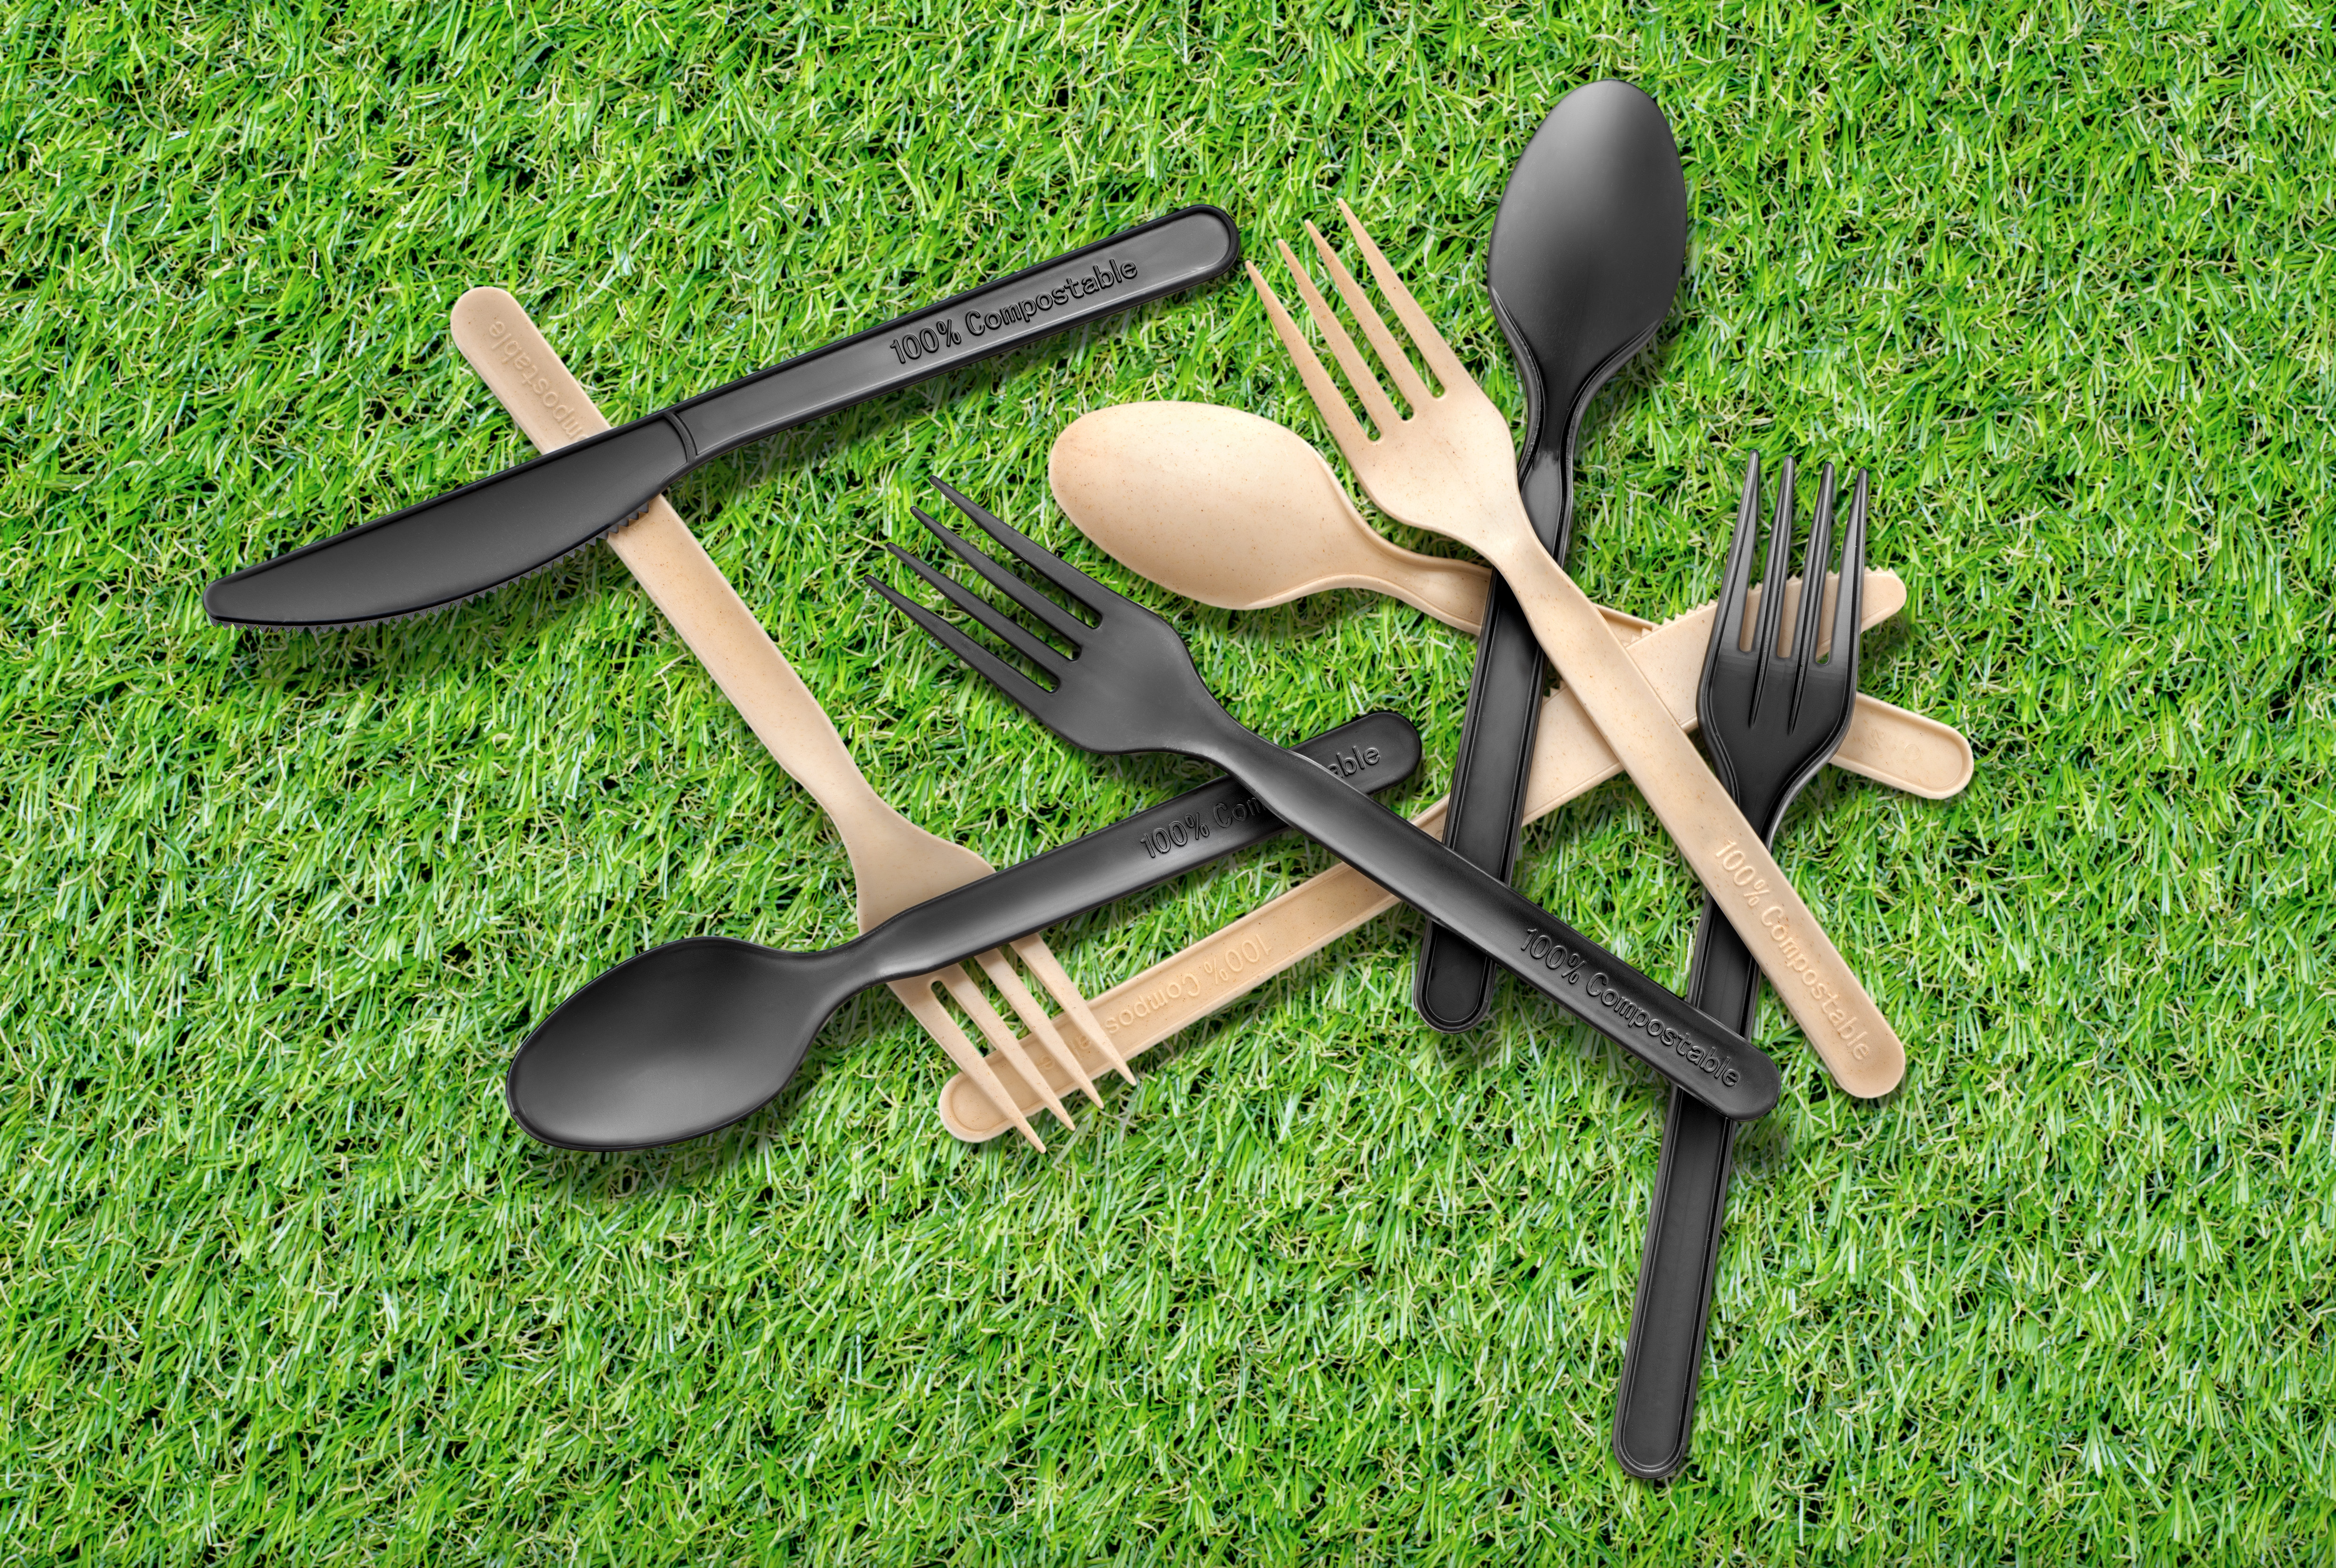 Packnwood's collection of eco-friendly utensils